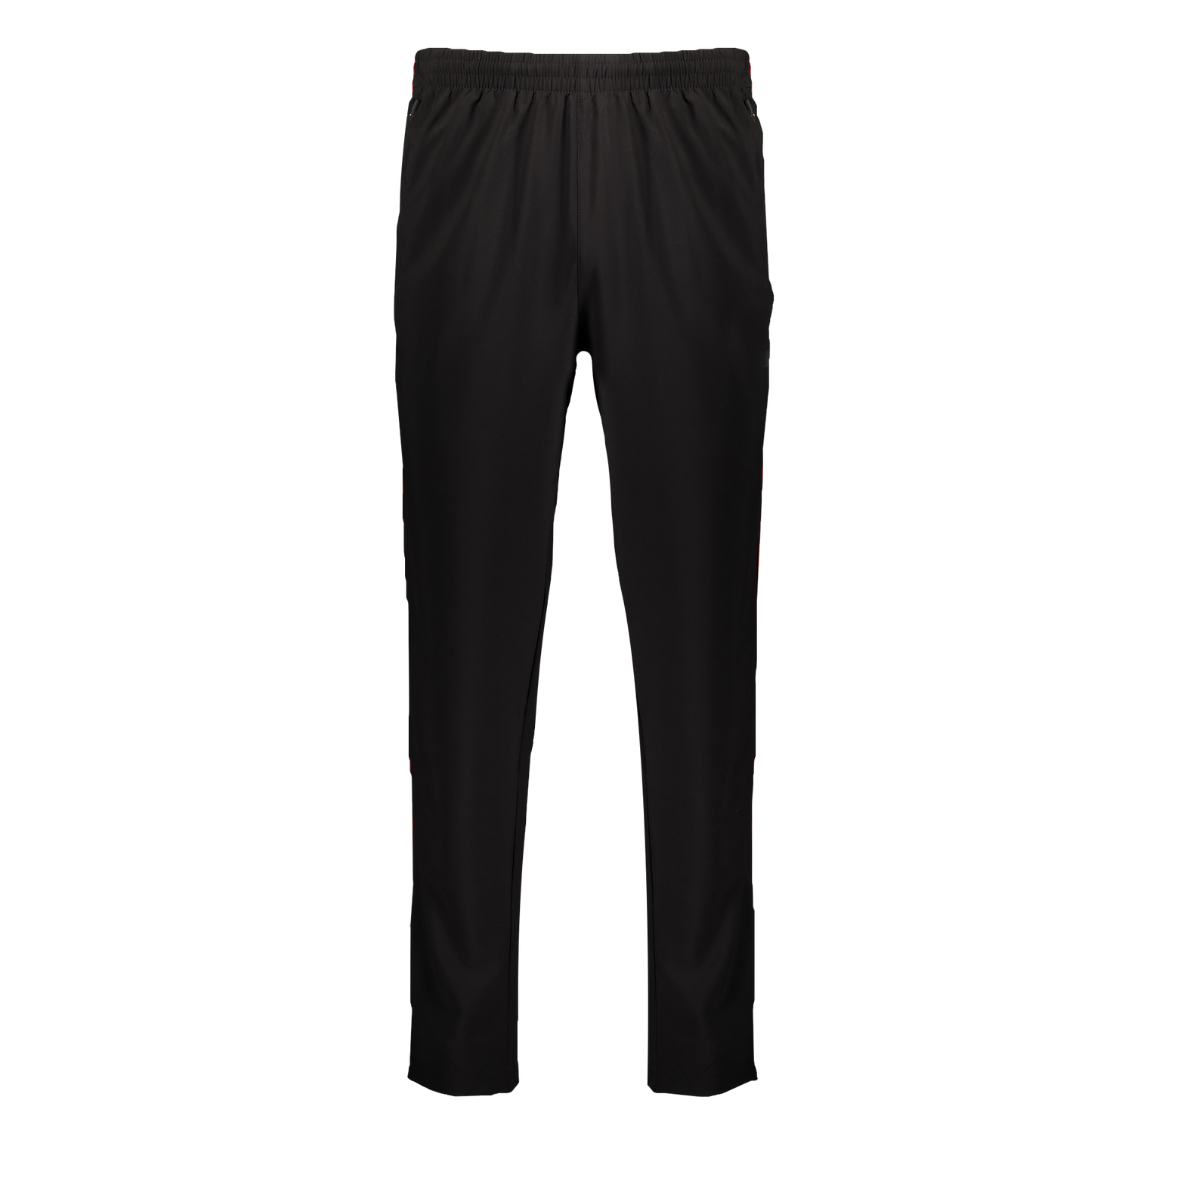 Men's sports pants. Good quality stretchy fabric. Available in different colors